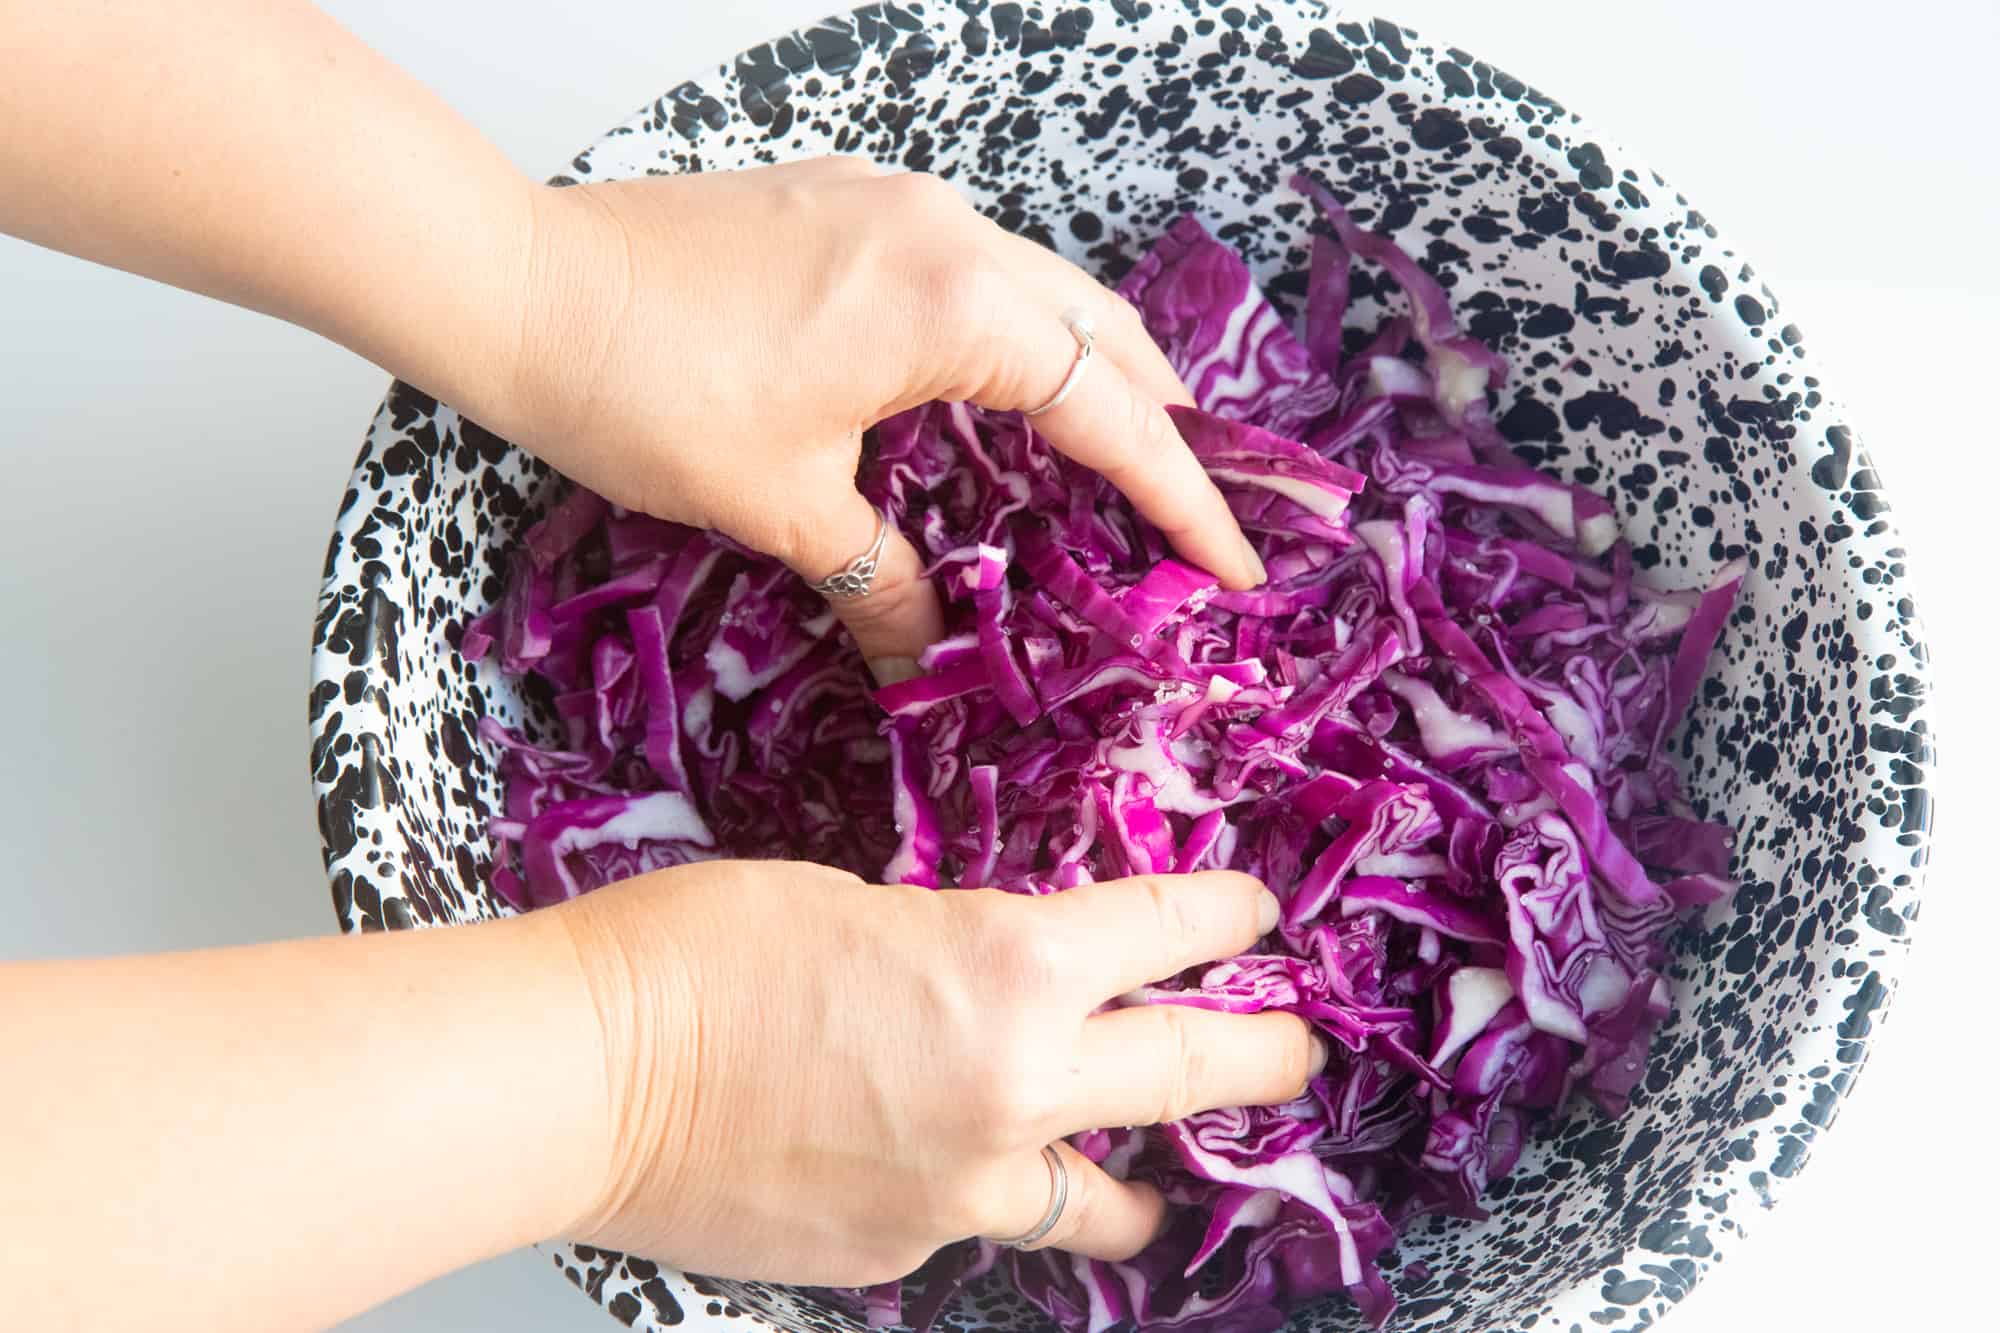 Two hands massage sliced red cabbage in a speckled bowl.